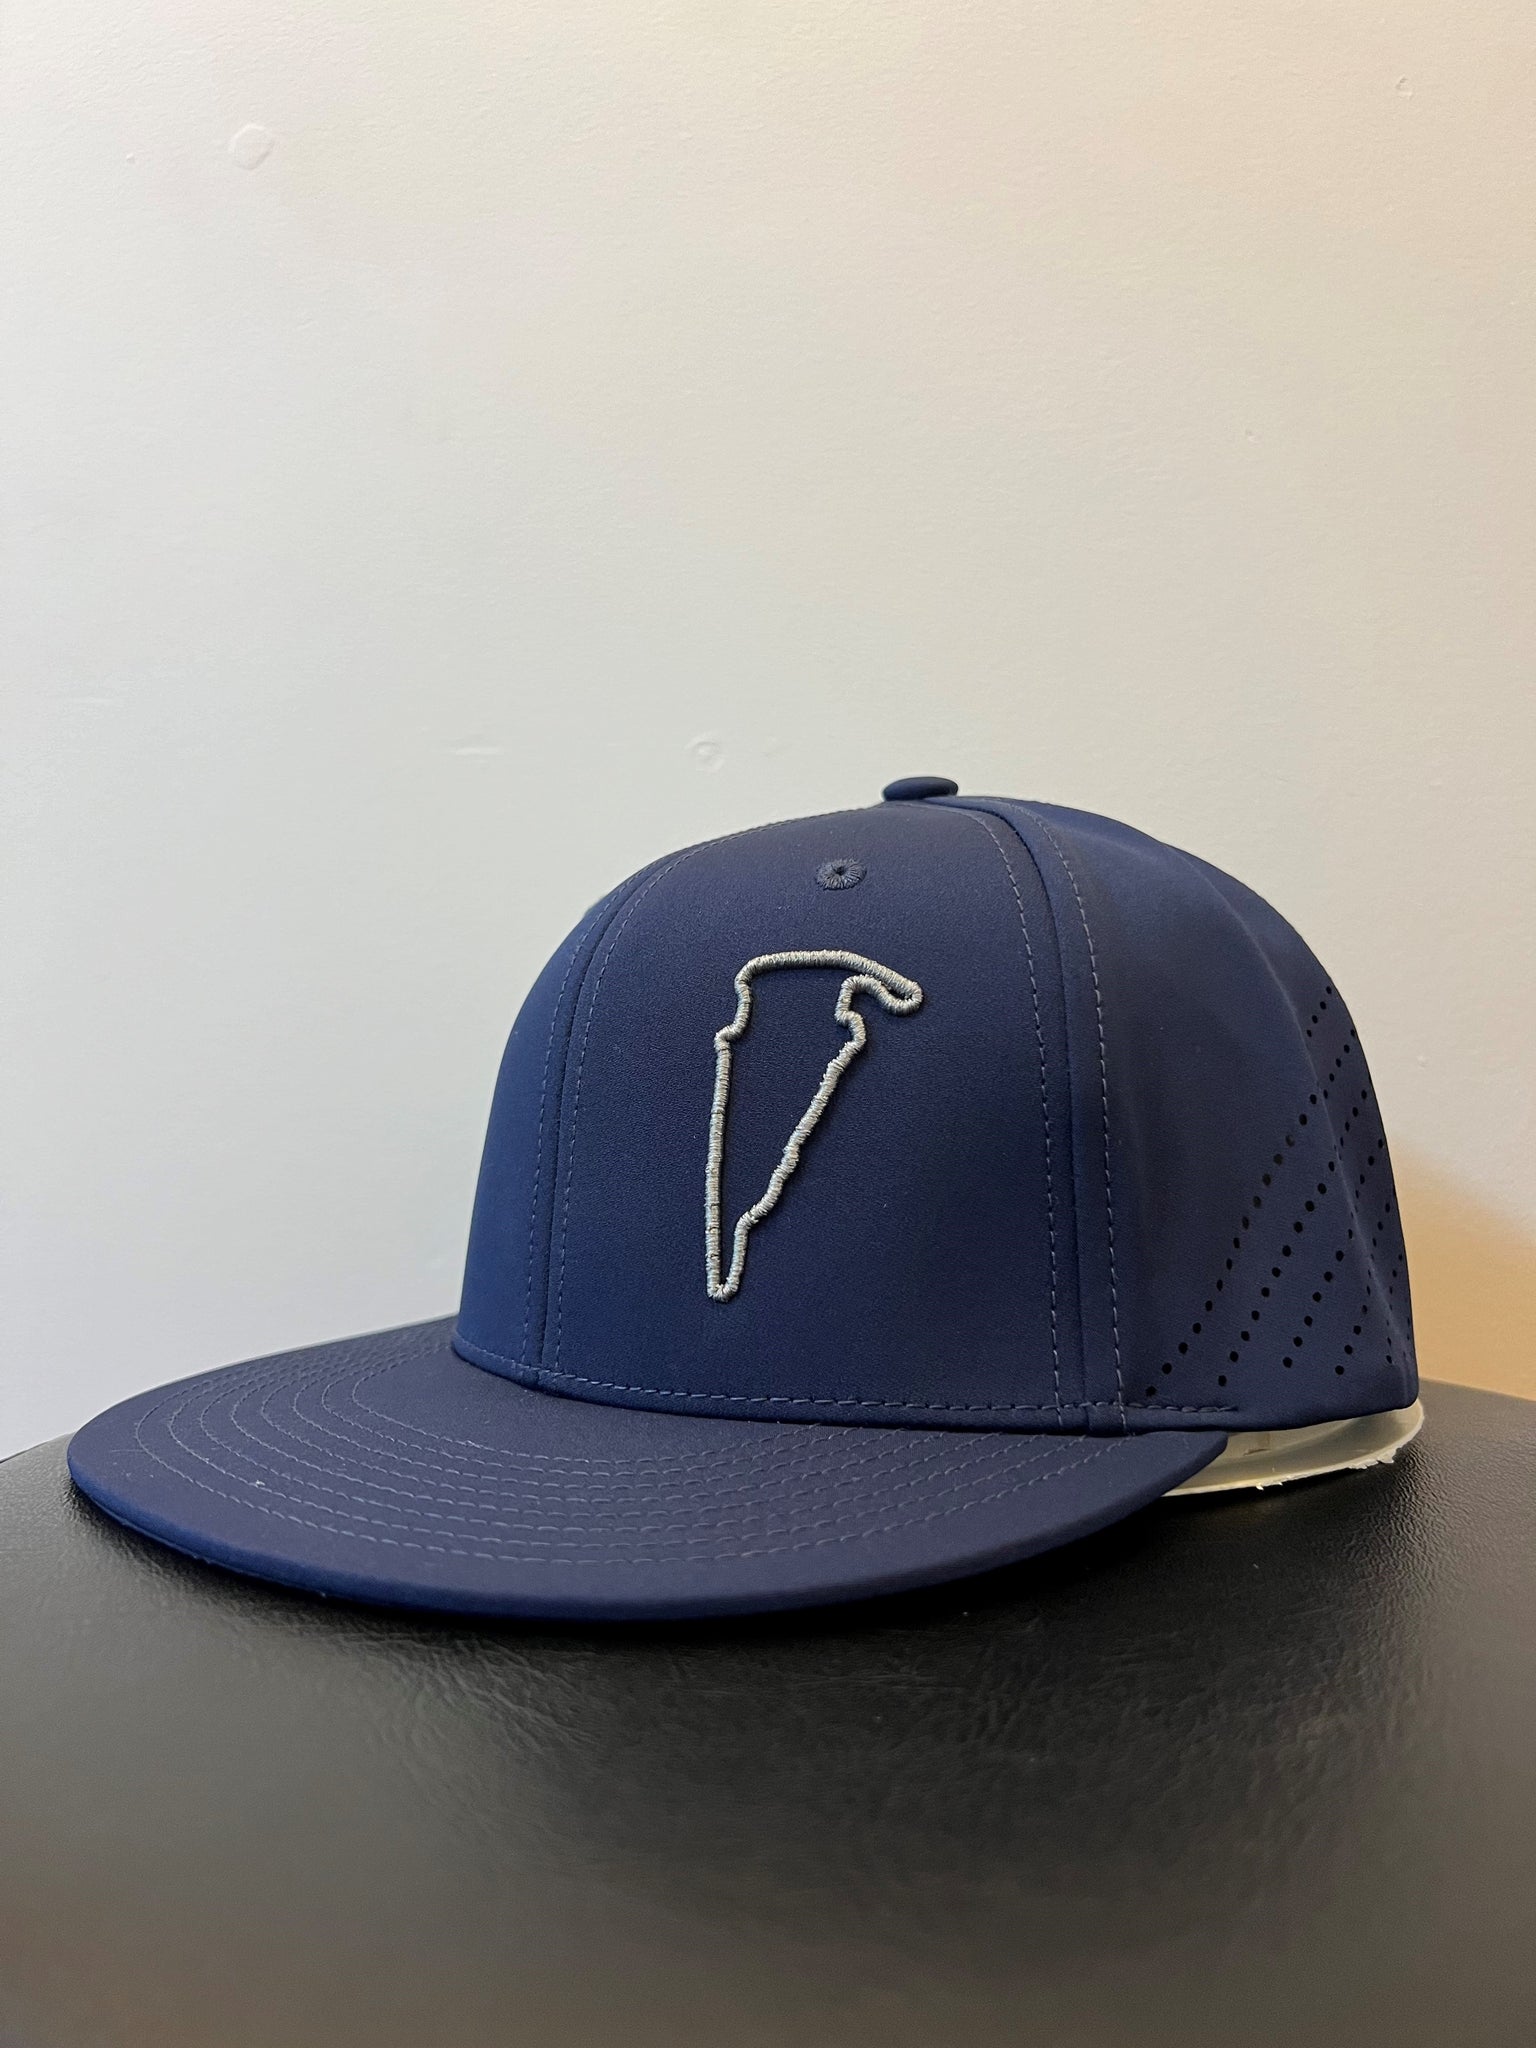 VIR 3D Track Map Cap (Size: S/M or L/XL)